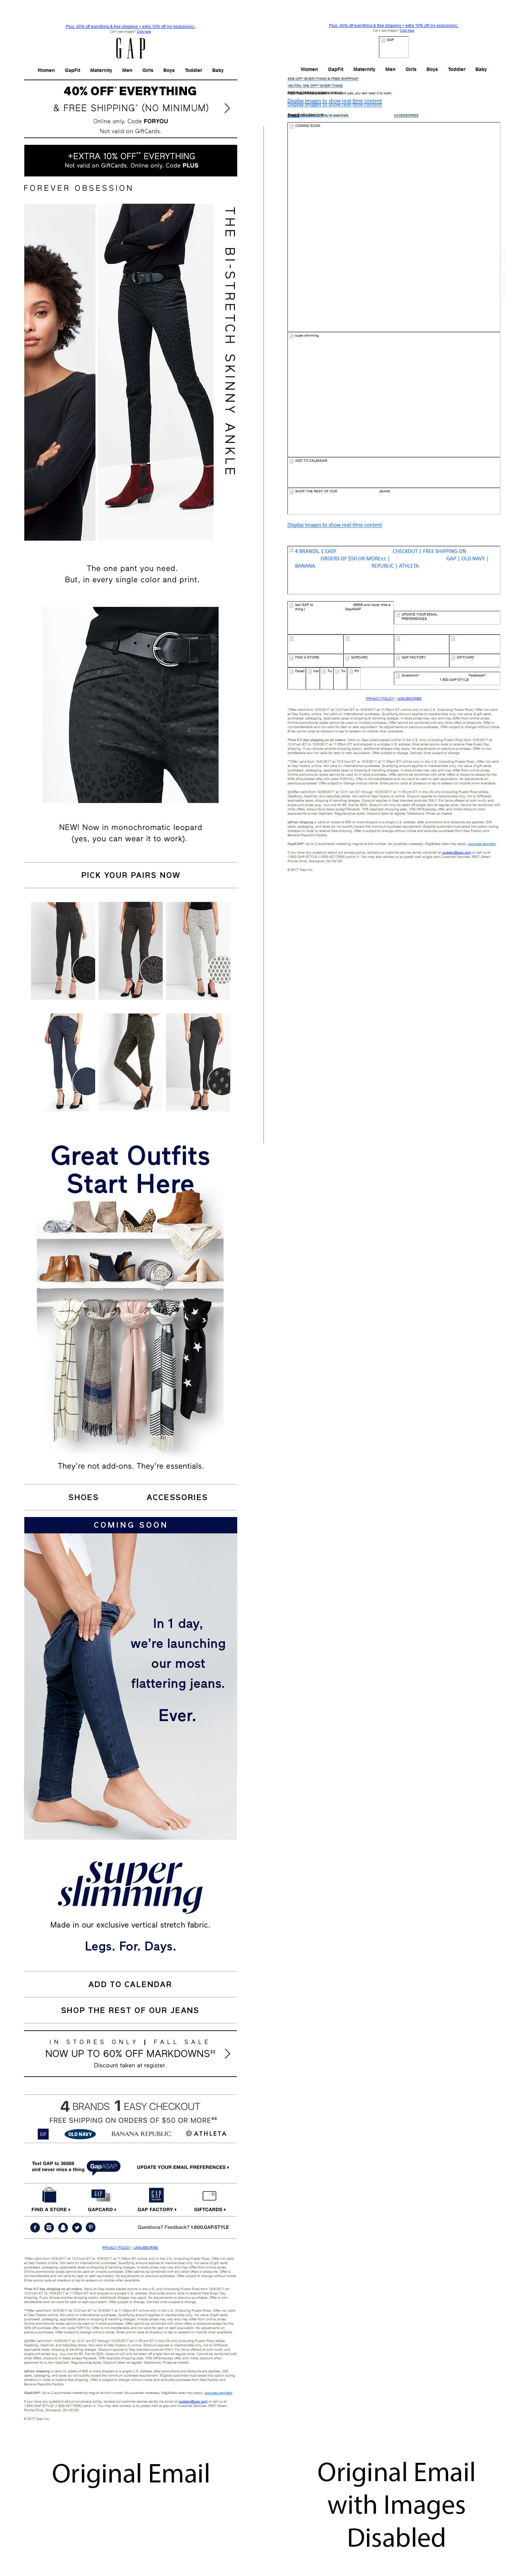 Gap email